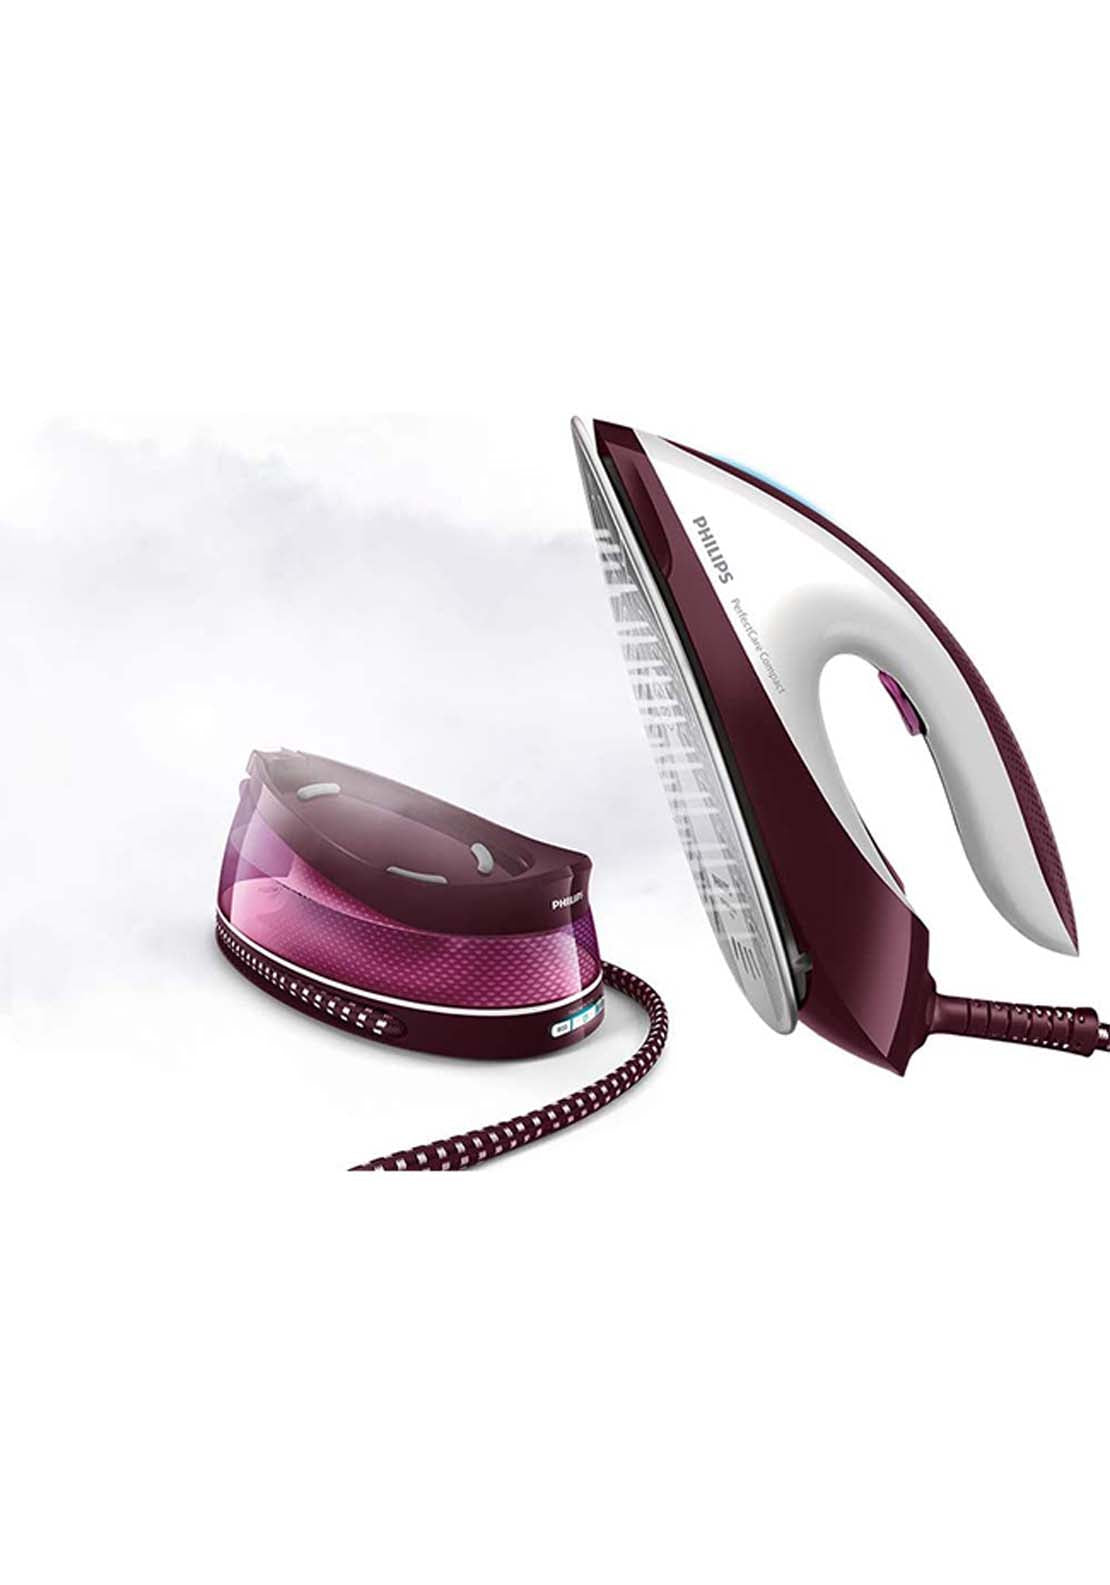 Philips PerfectCare Steam Iron | Gc784246 2 Shaws Department Stores